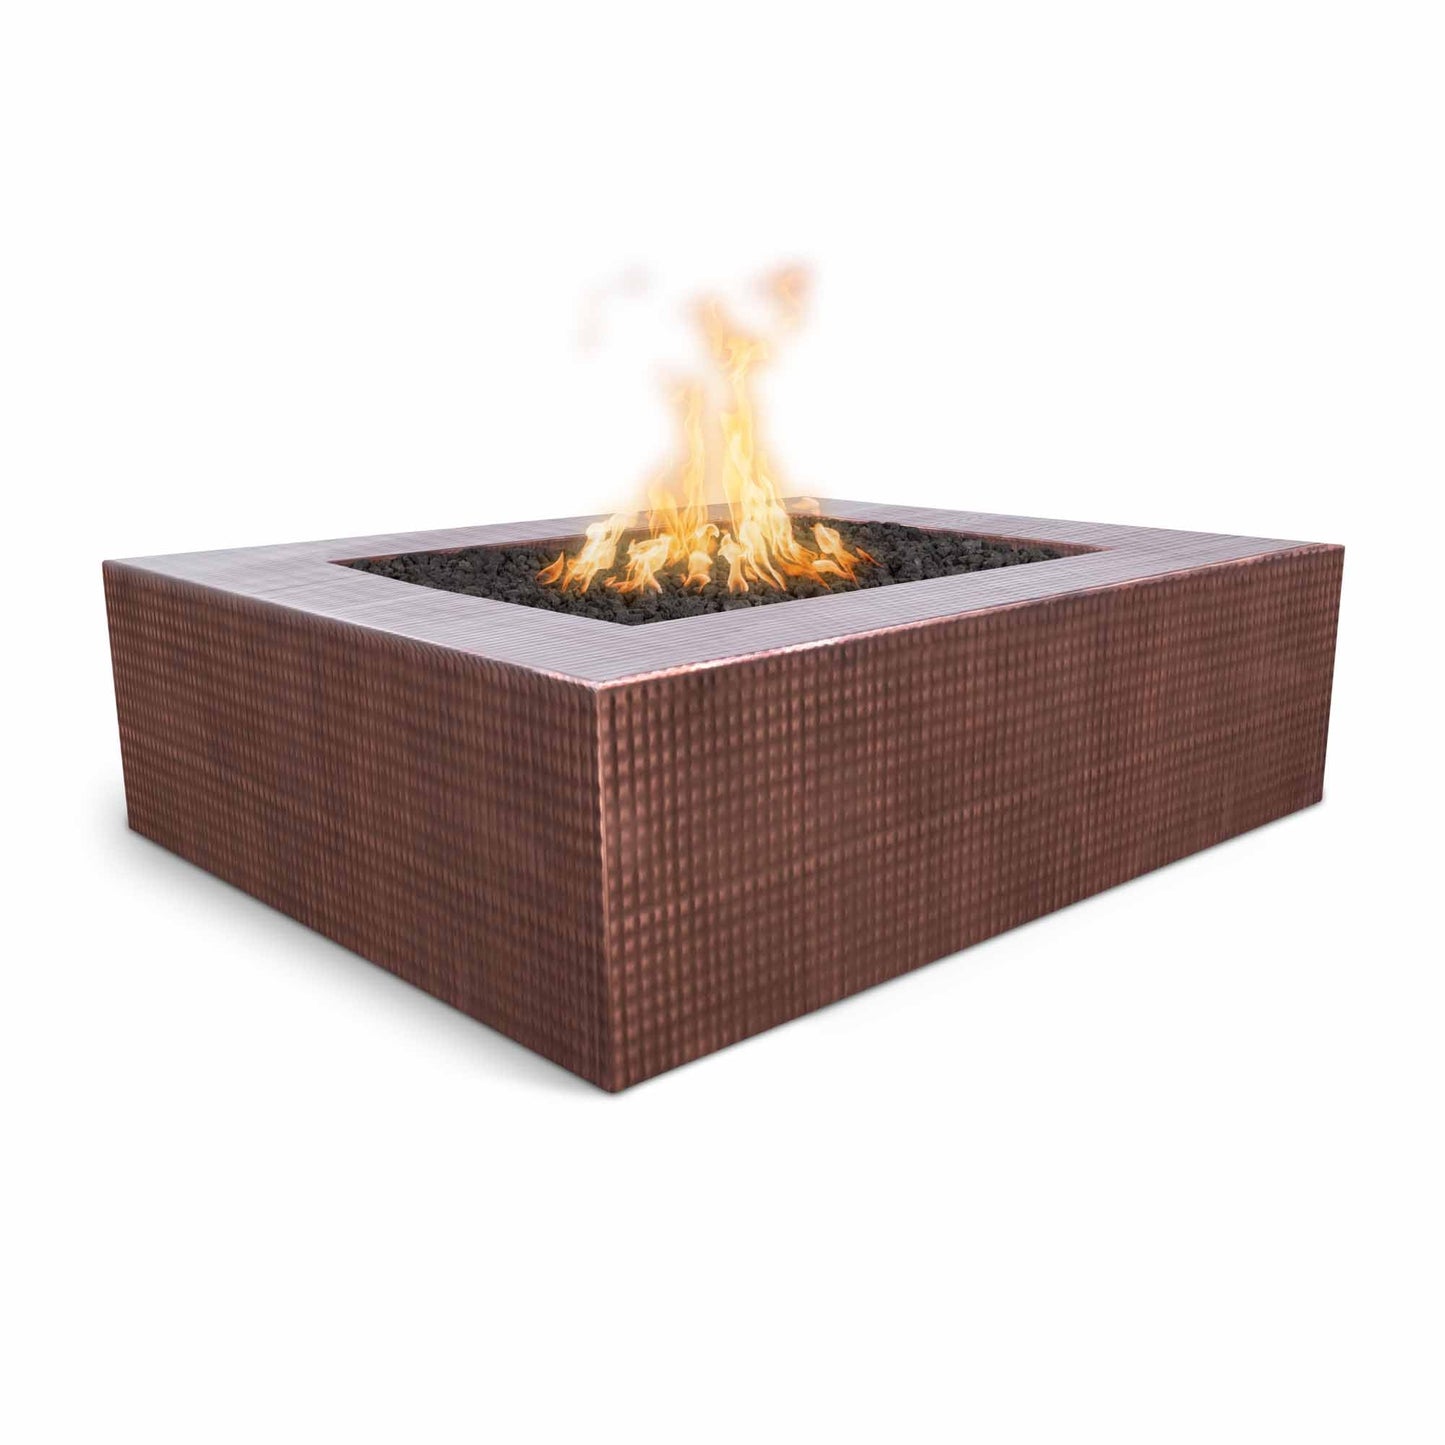 The Outdoor Plus Square Quad 36" Hammered Copper Natural Gas Fire Pit with 110V Electronic Ignition